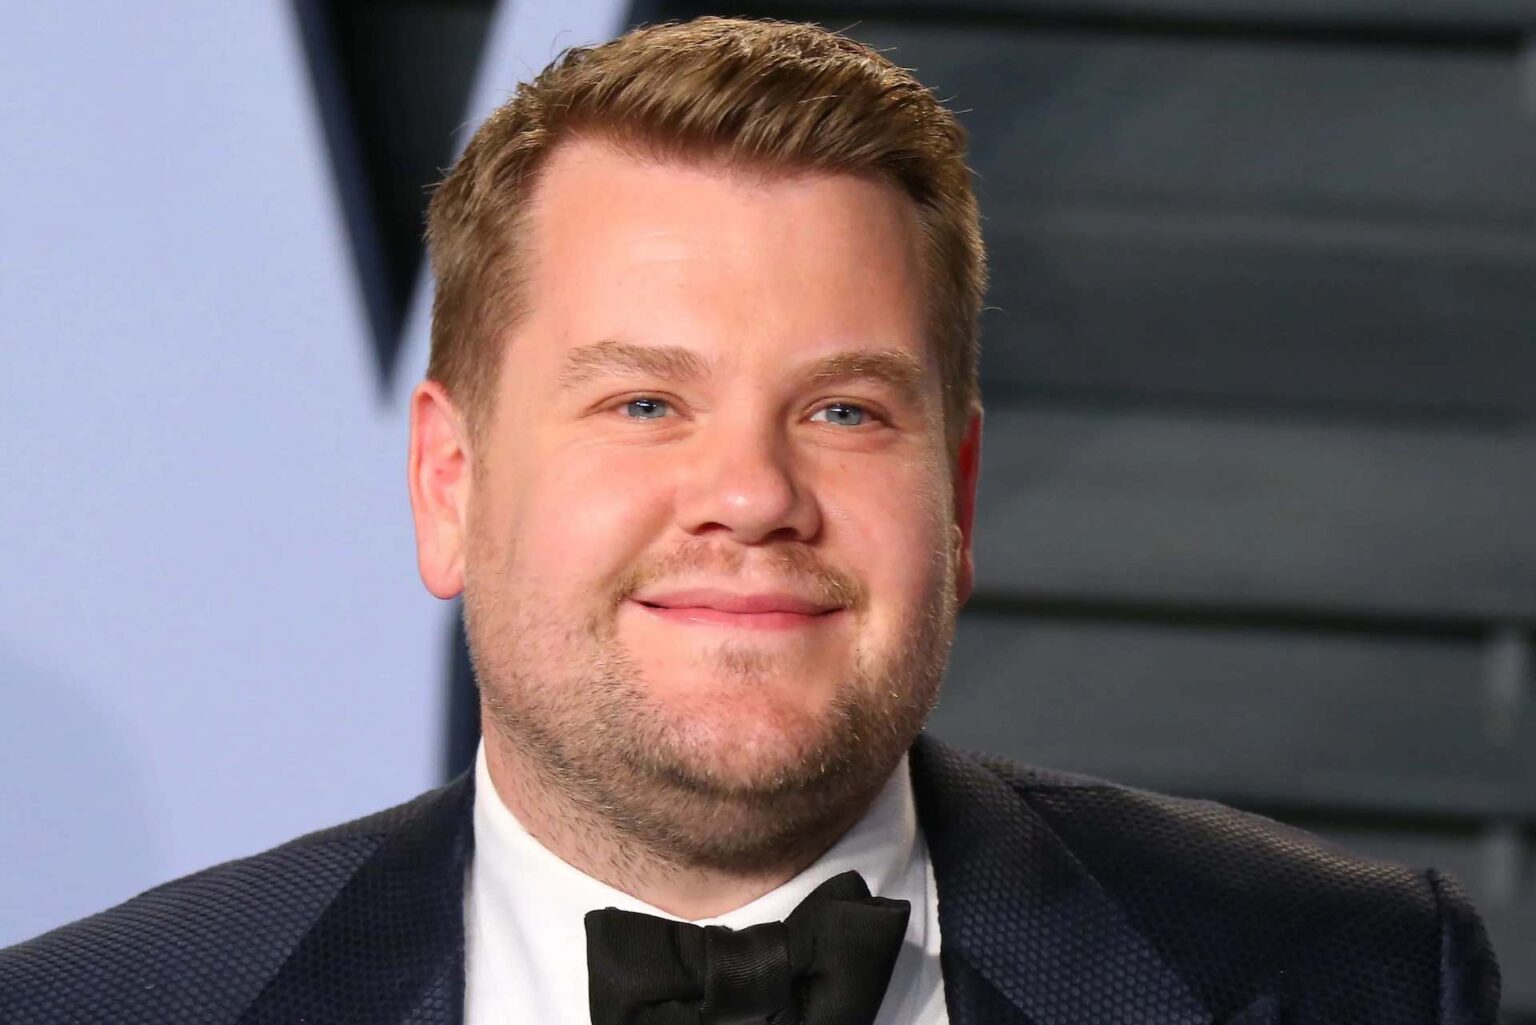 Comedian James Corden has found himself embroiled in controversy in recent months over accusations of rude behavior. Will this affect his net worth?